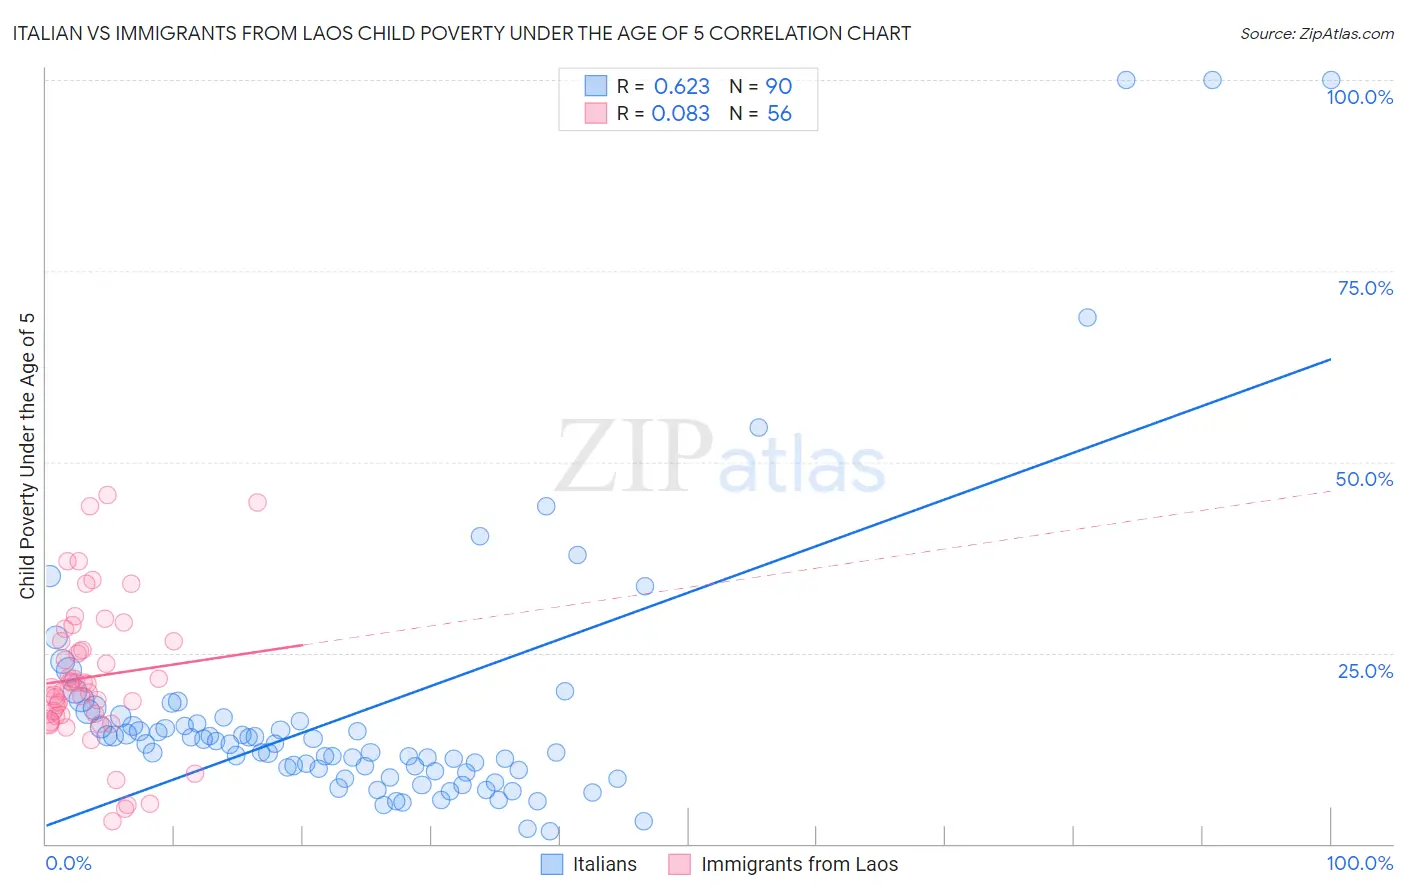 Italian vs Immigrants from Laos Child Poverty Under the Age of 5